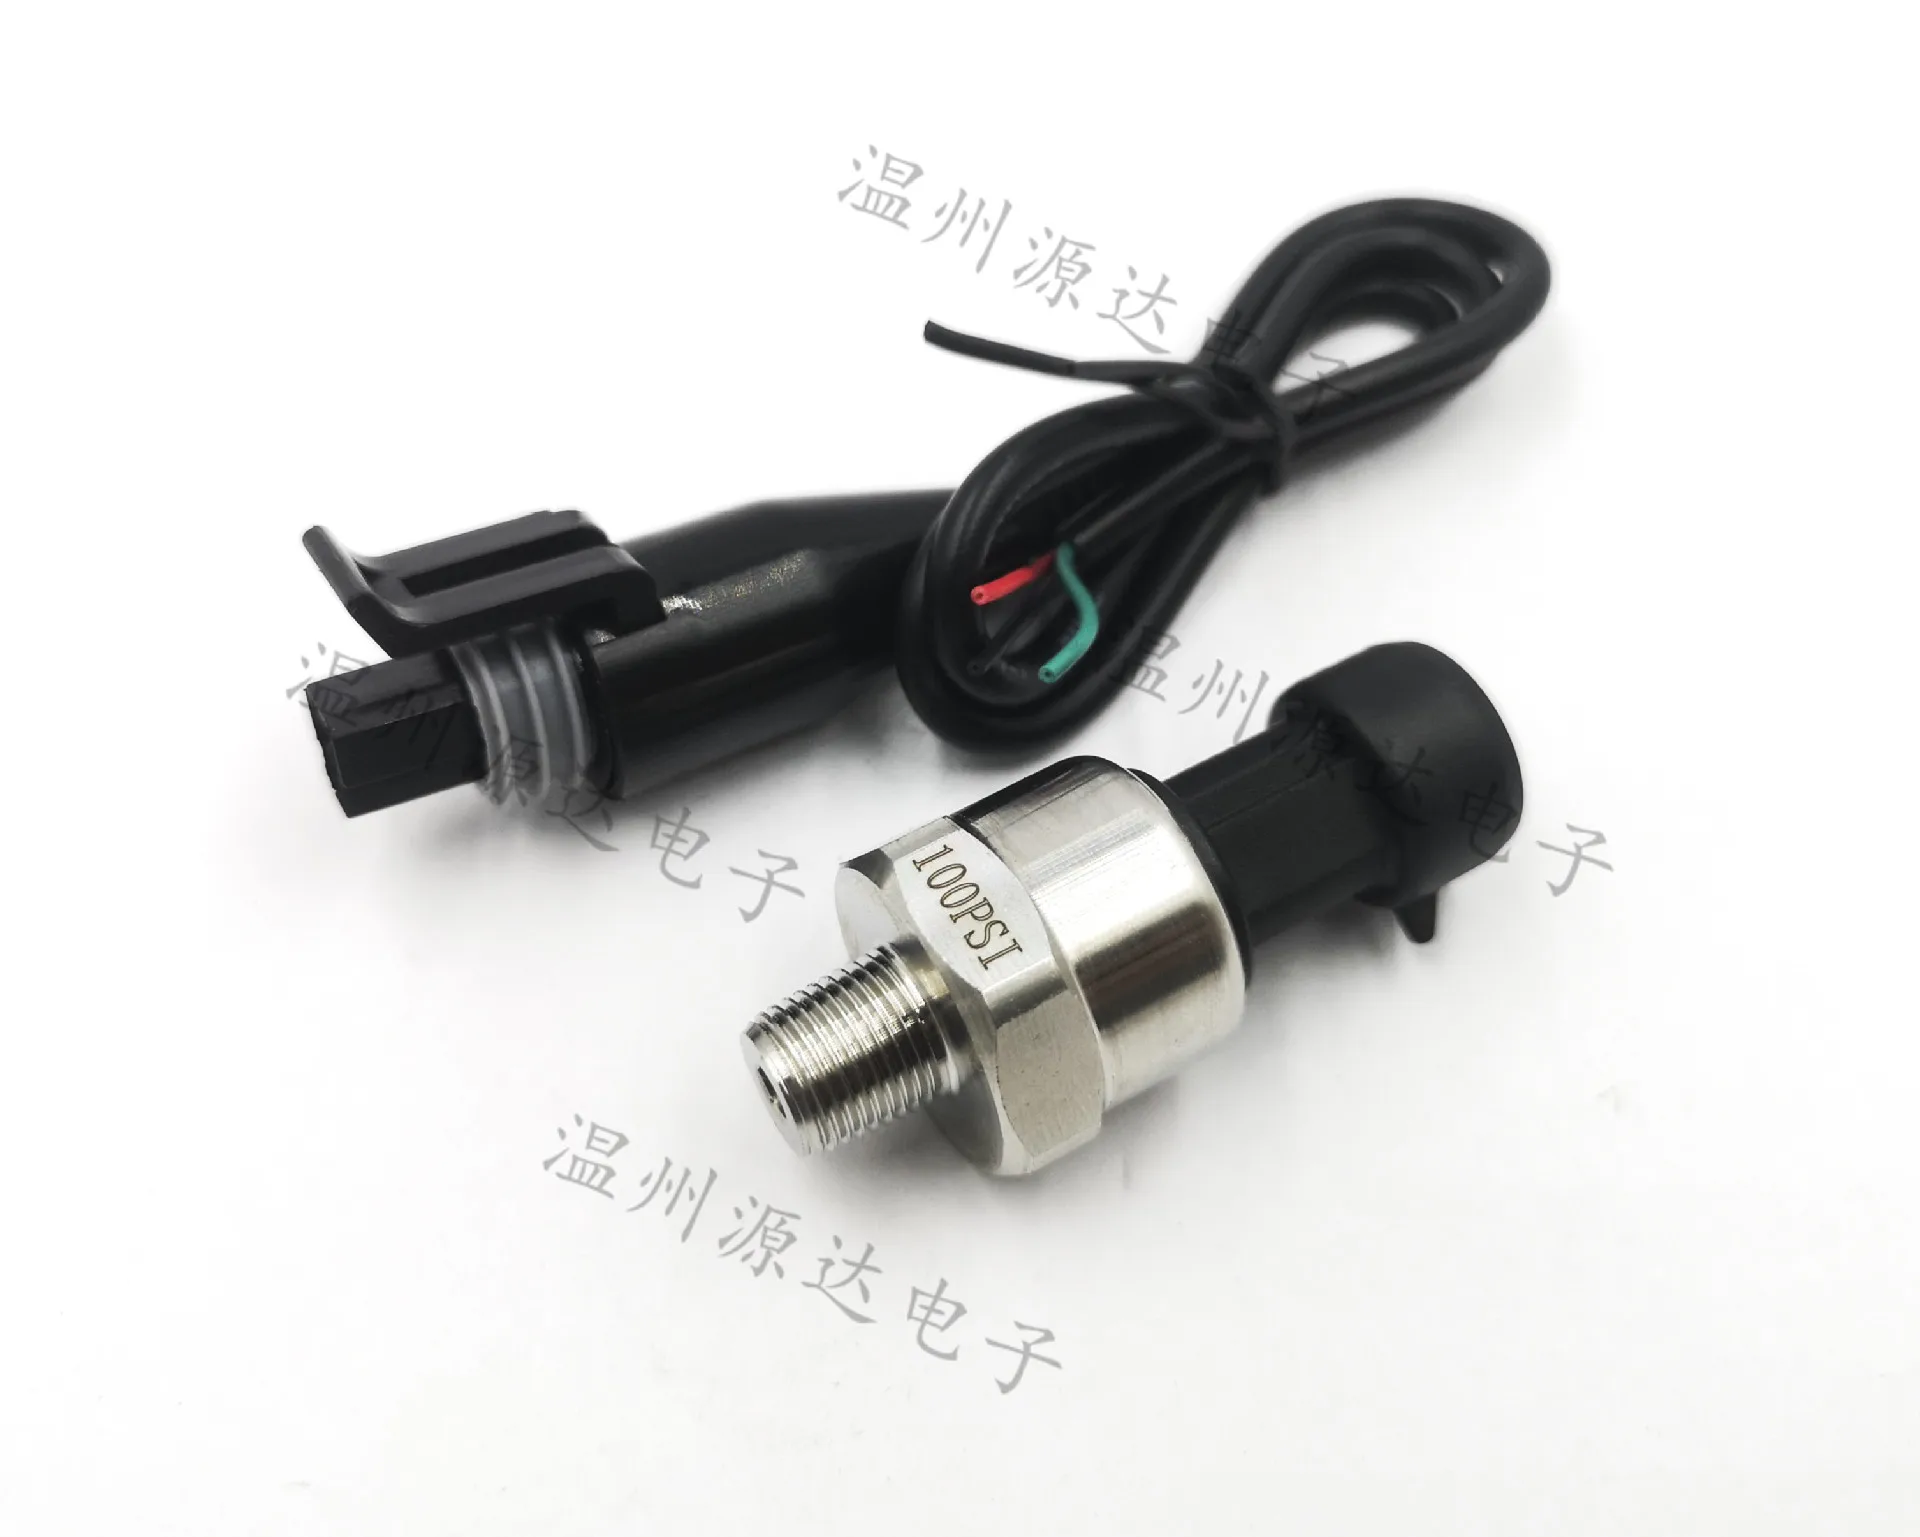 

Water Pressure Fuel Pressure Sensor Pressure Transmitter 100PSI 5V Products Are Equipped with Connecting Wire NPT1/8